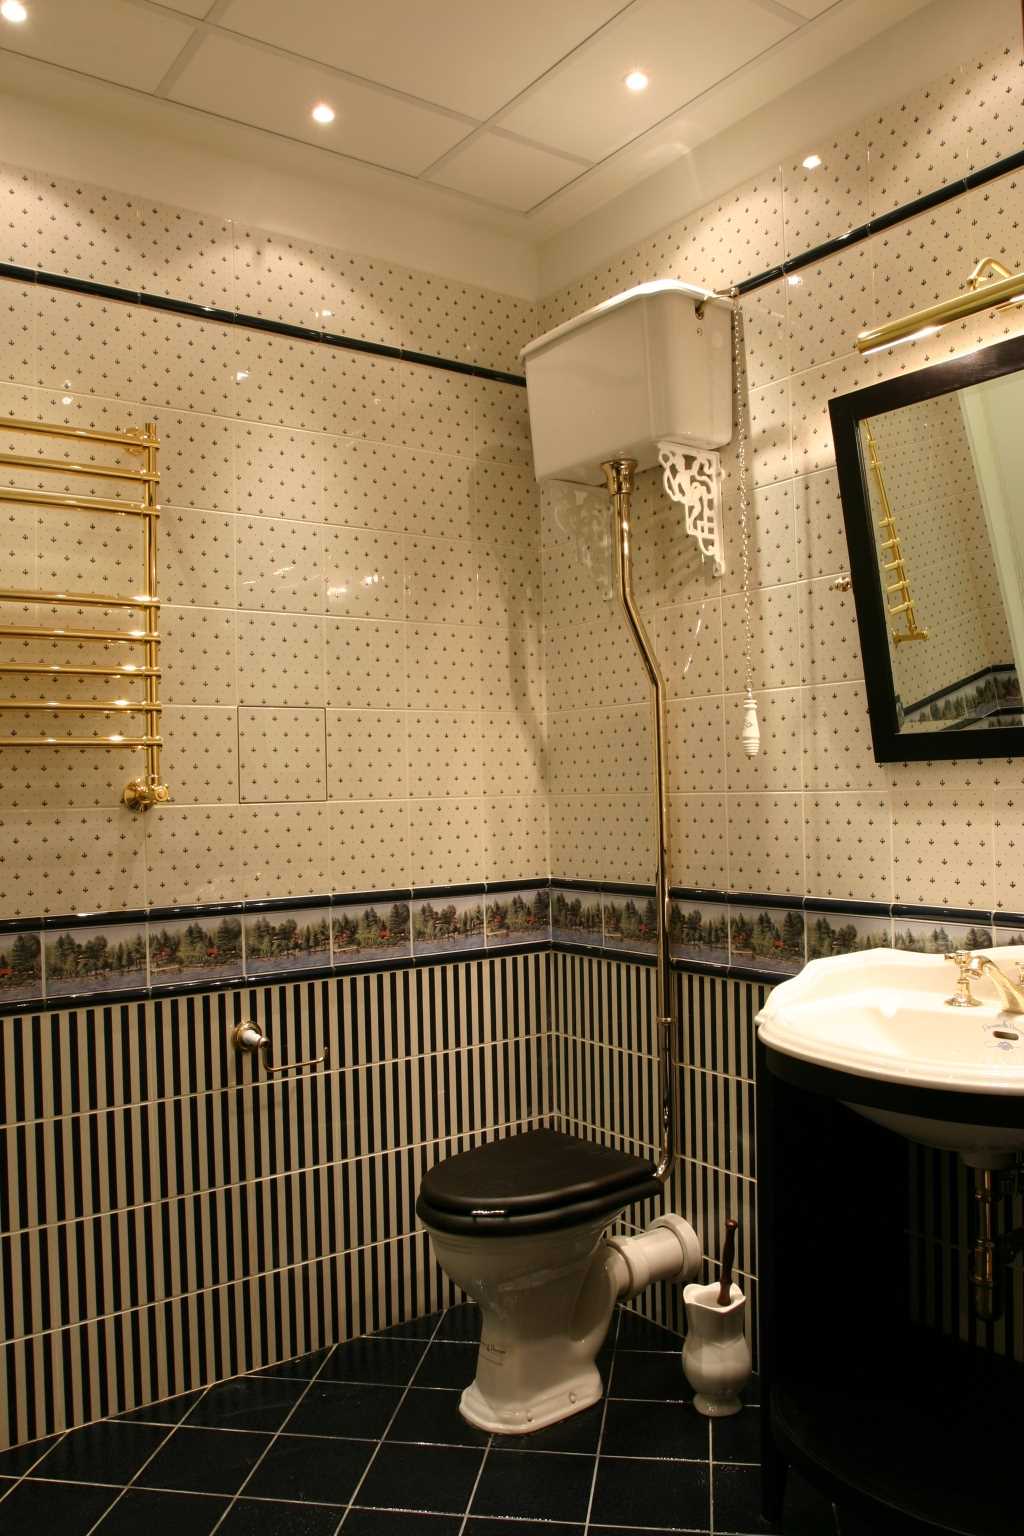 option of a light style bathroom in a classic style